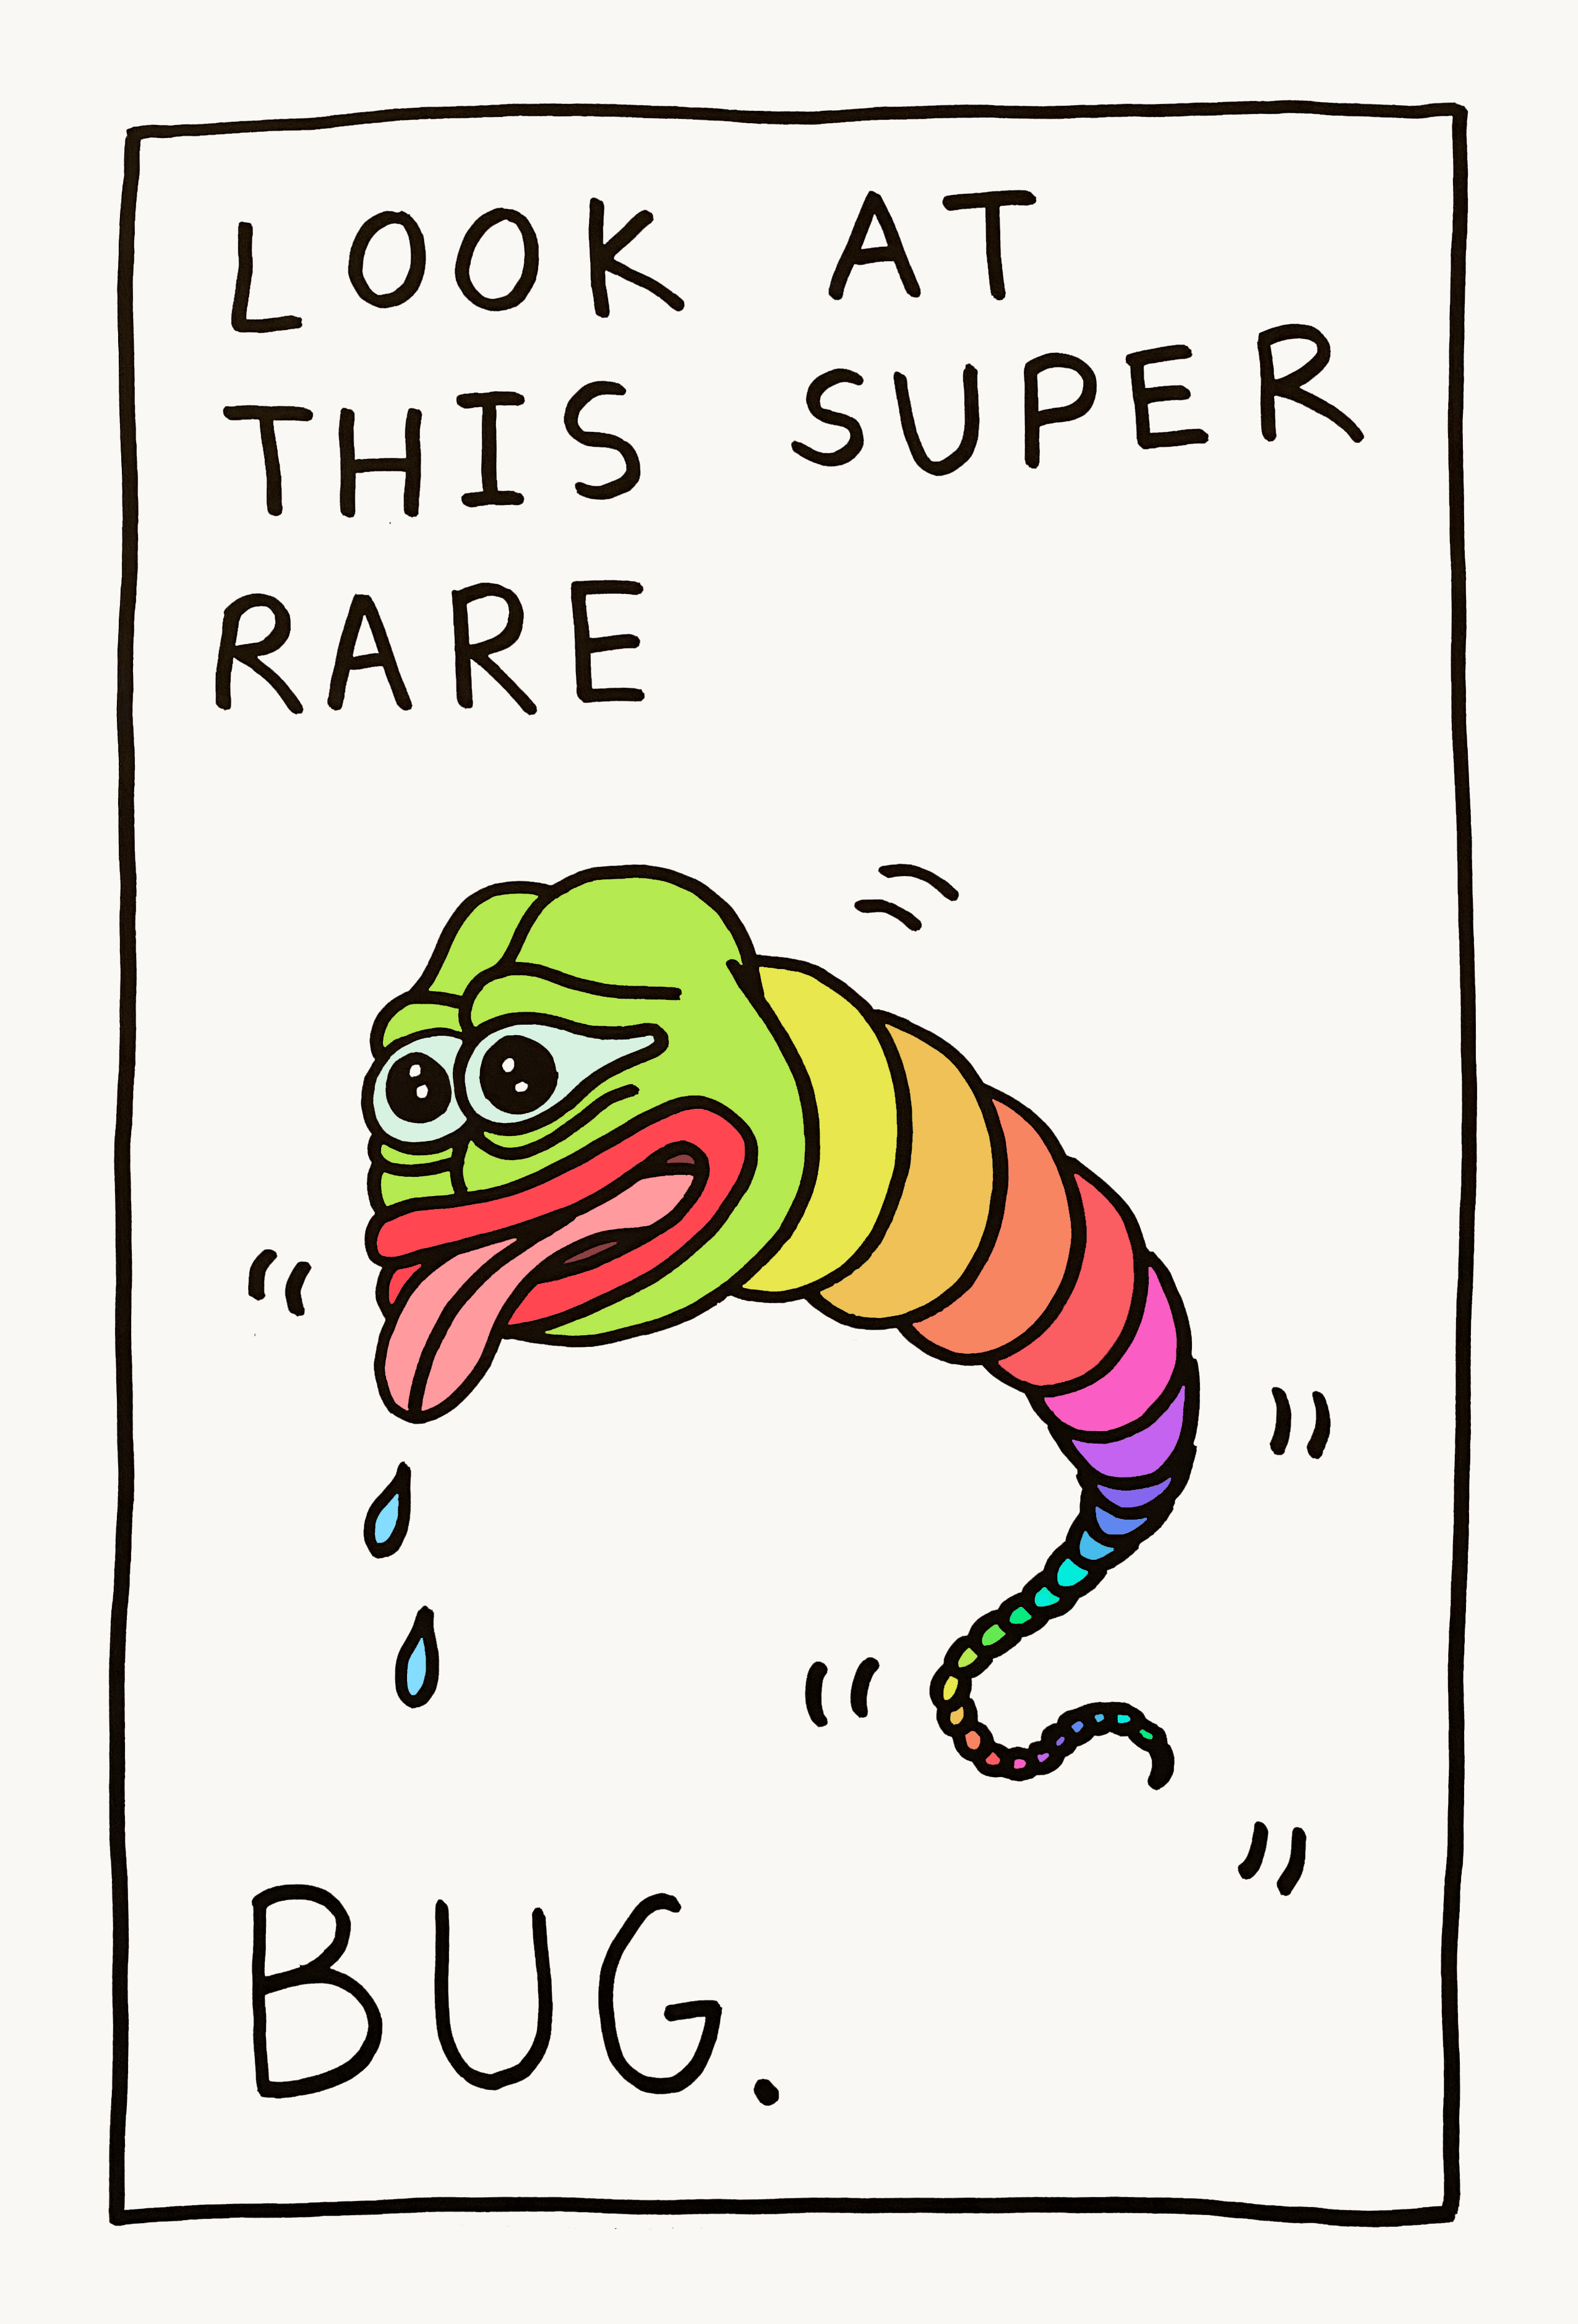 ANOTHER SUPER RARE BUG